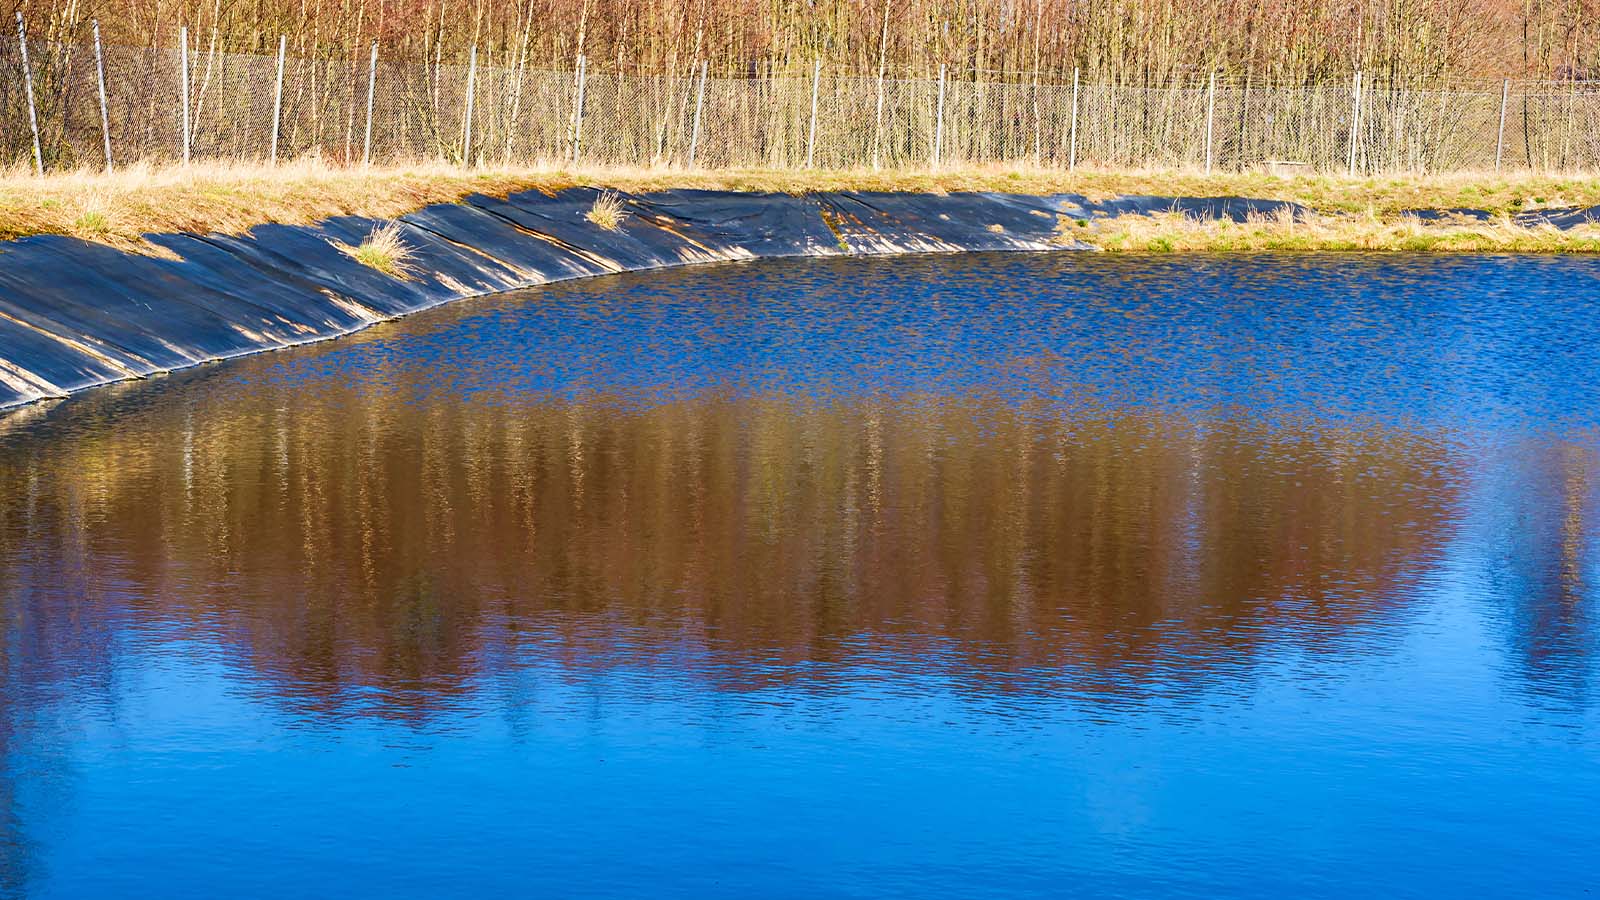 Leachate - What is it & why is it a problem?